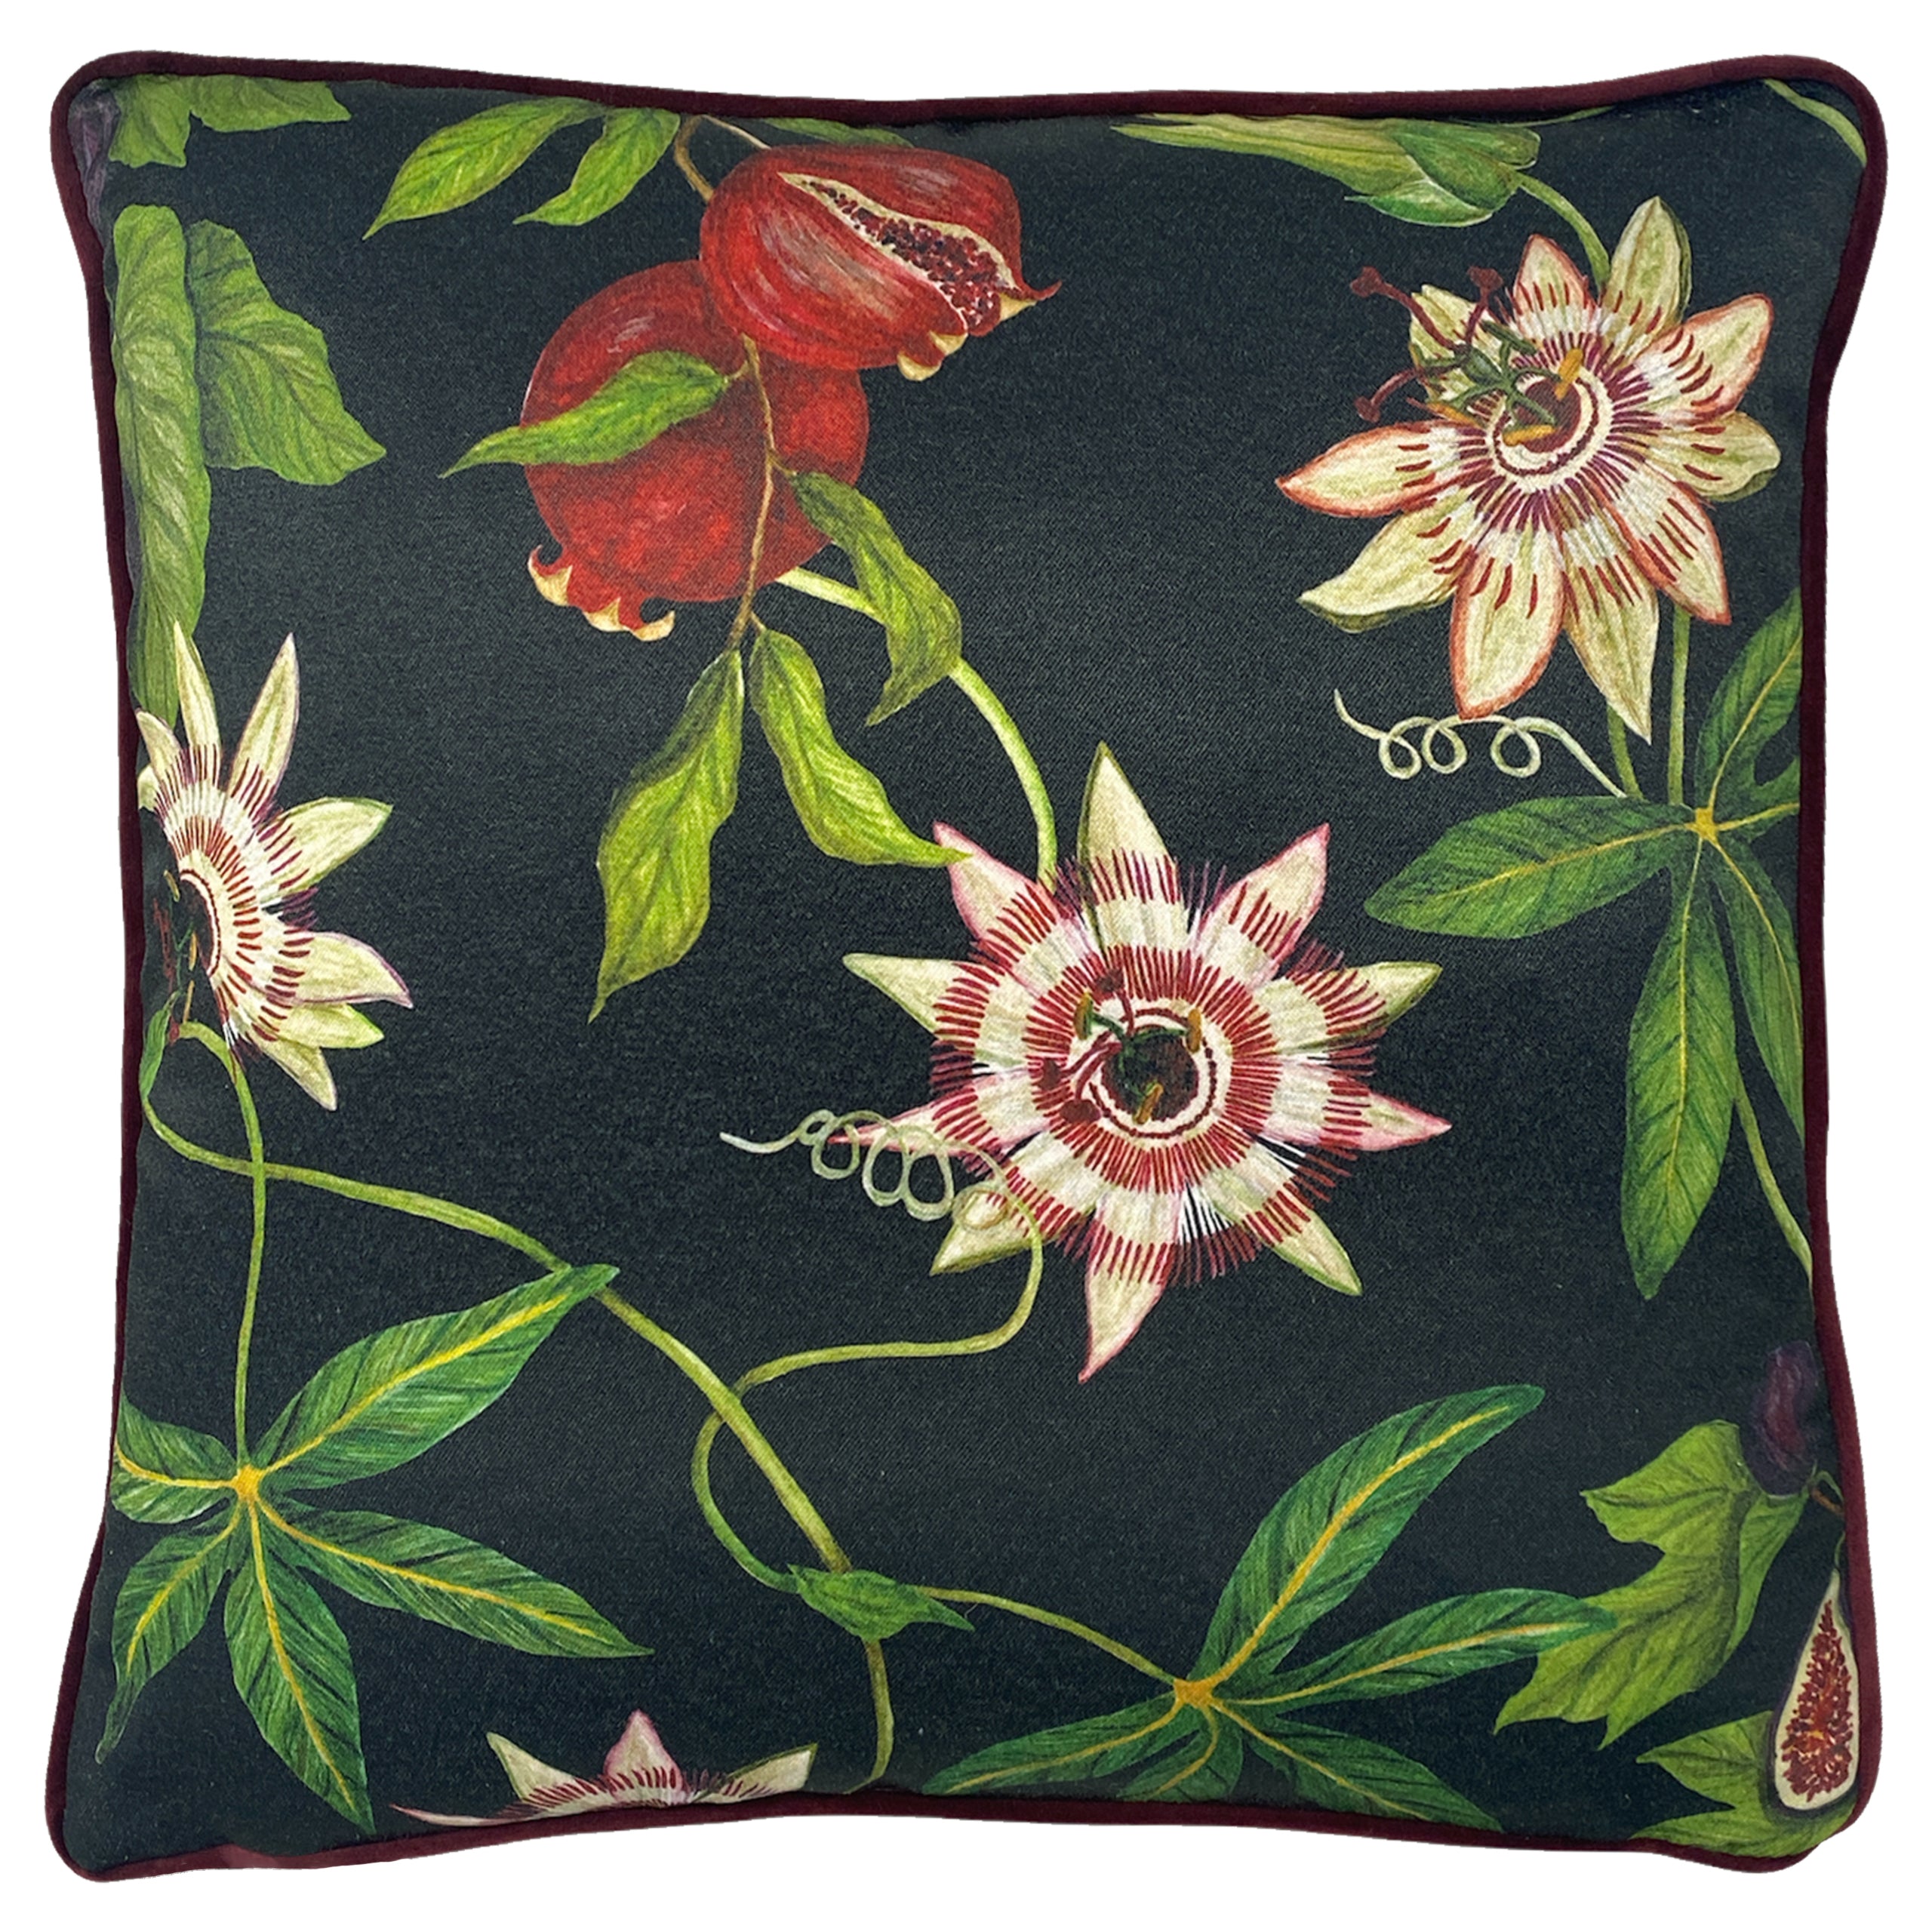 Leopold Passionflower Sofa Throw Cushion Accent Pillow Roseland